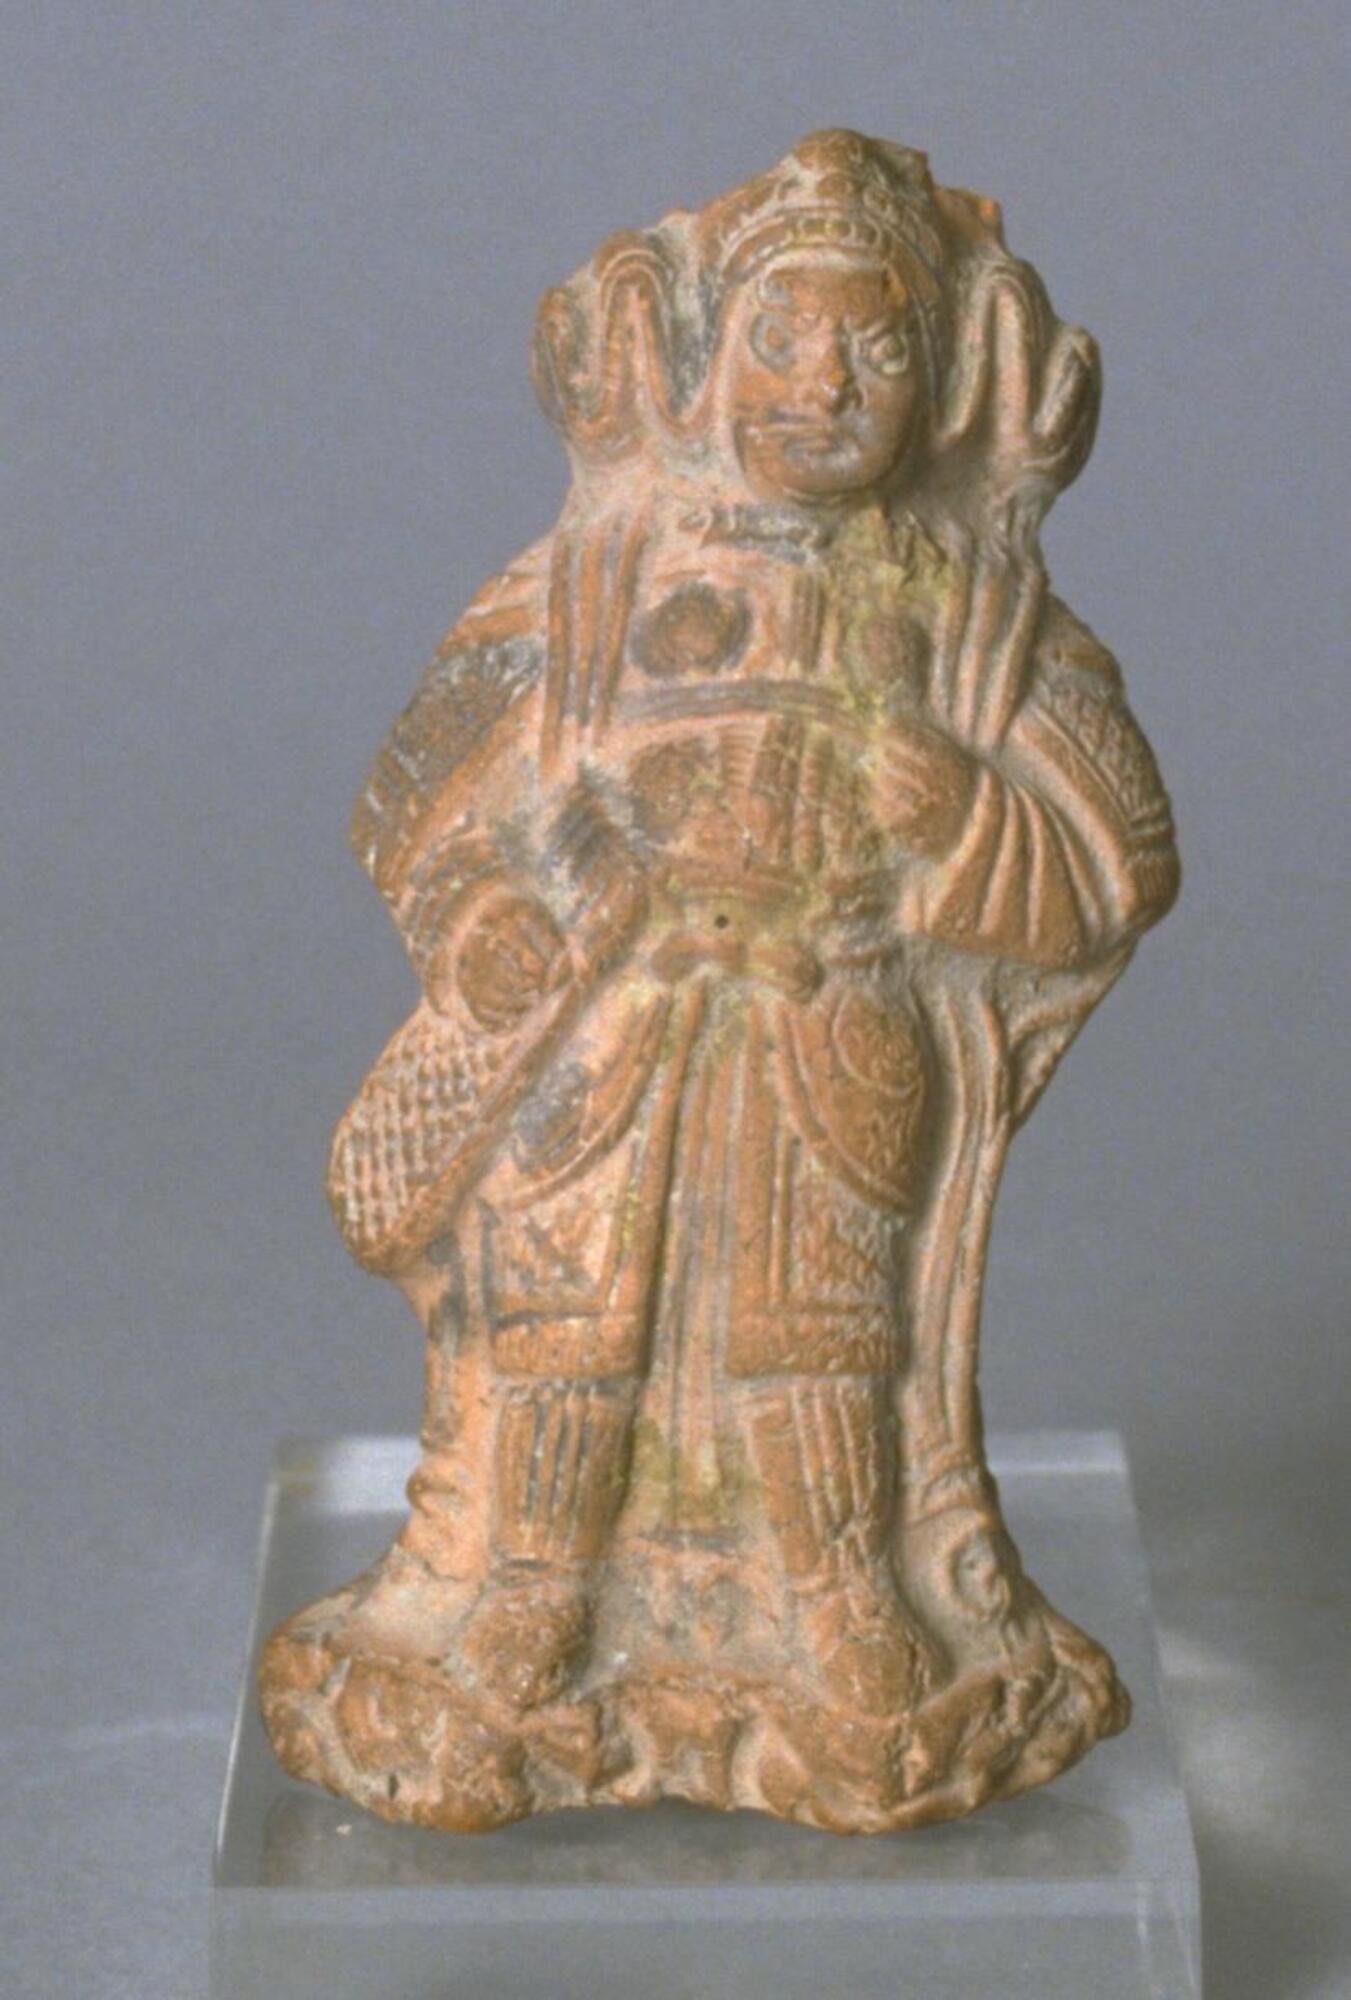 A red earthenware standing figure of Tianwang—Heavenly King, a Buddhist deity—wearing Tang dynasty styled armor including a helmet with flowing ribbons, elbow-length gauntlets, a cuirass with plaques, and taces, knee length greaves, and boots. The figure is standing on a rock-styled base, unglazed with traces of mineral pigment. 